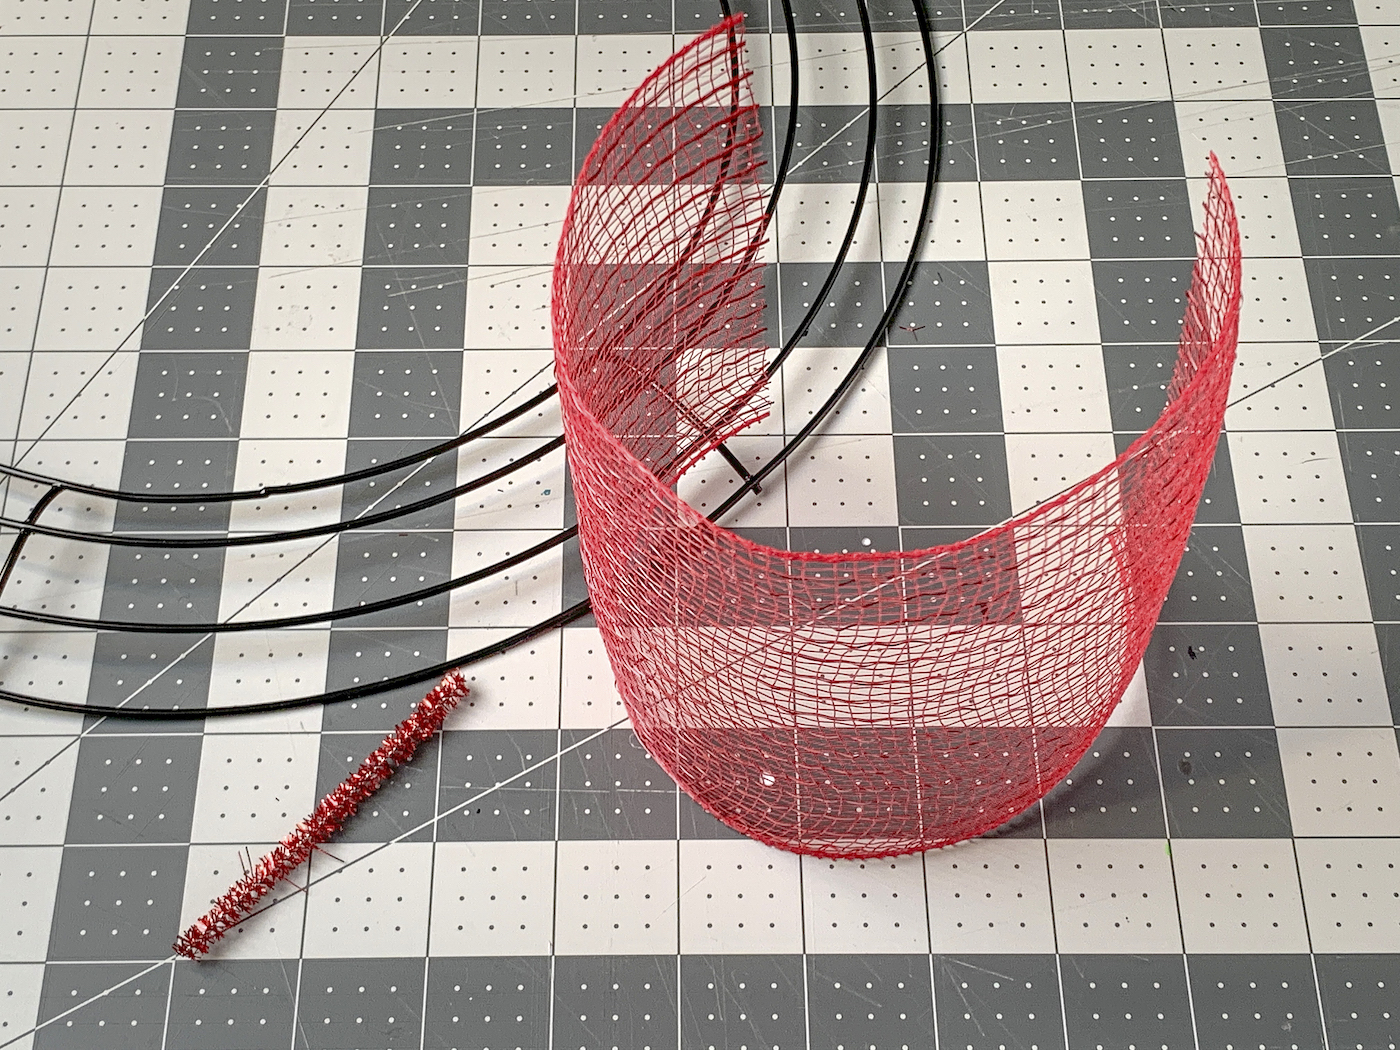 Circle wire wreath form, piece of red deco mesh, and a pipe cleaner piece